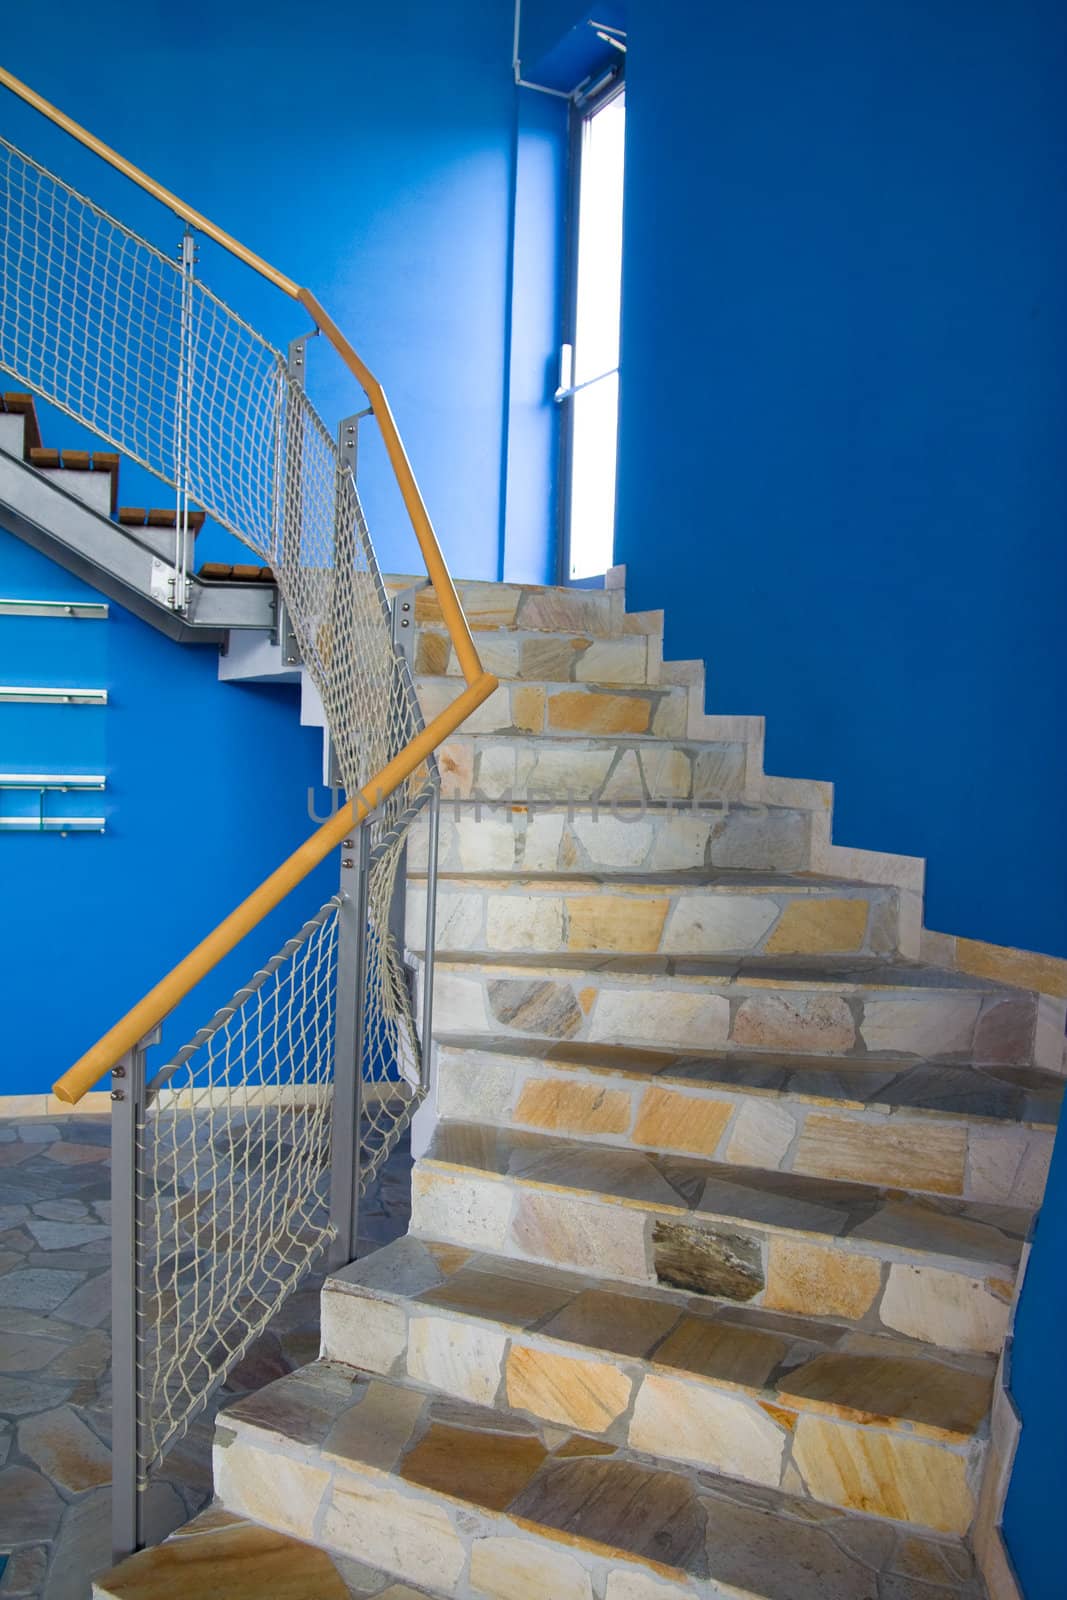 Staircase with blue walls and fence going upstairs.